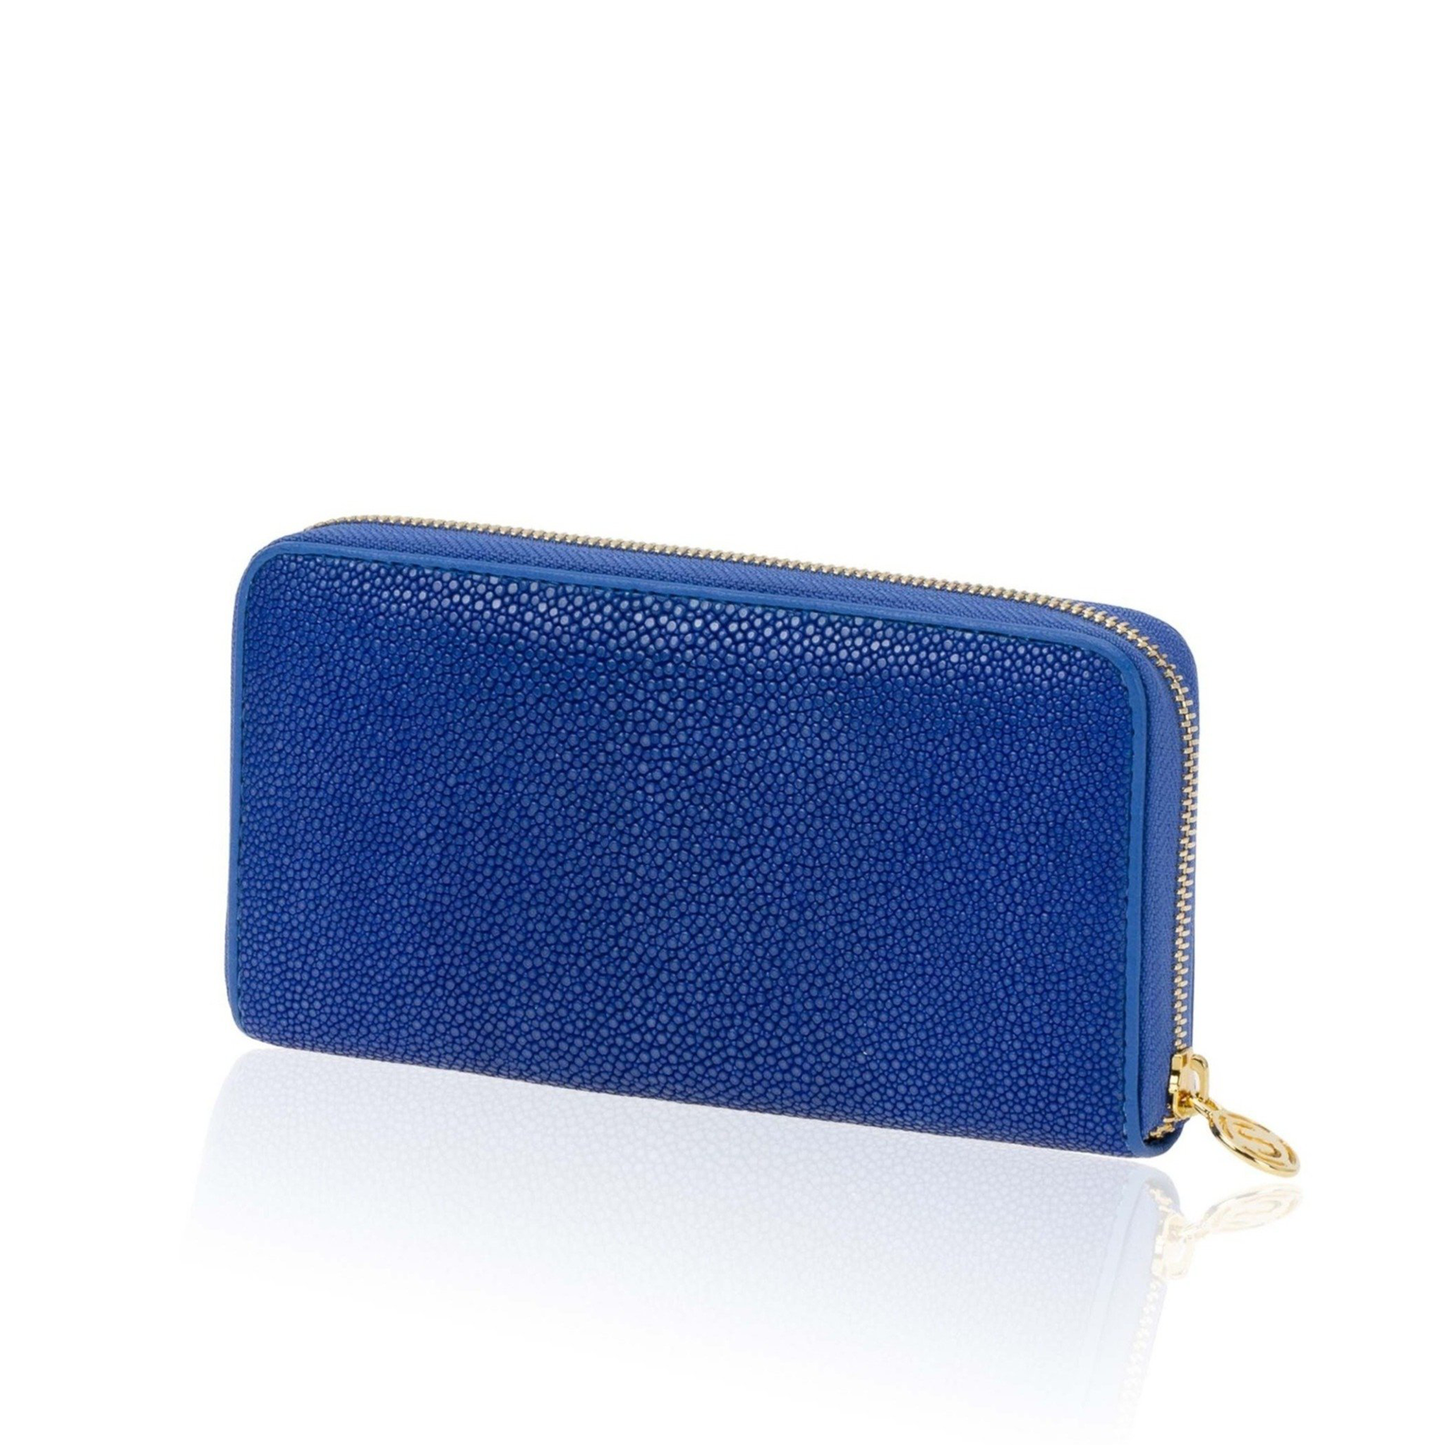 Wallet in Blue Stingray Leather